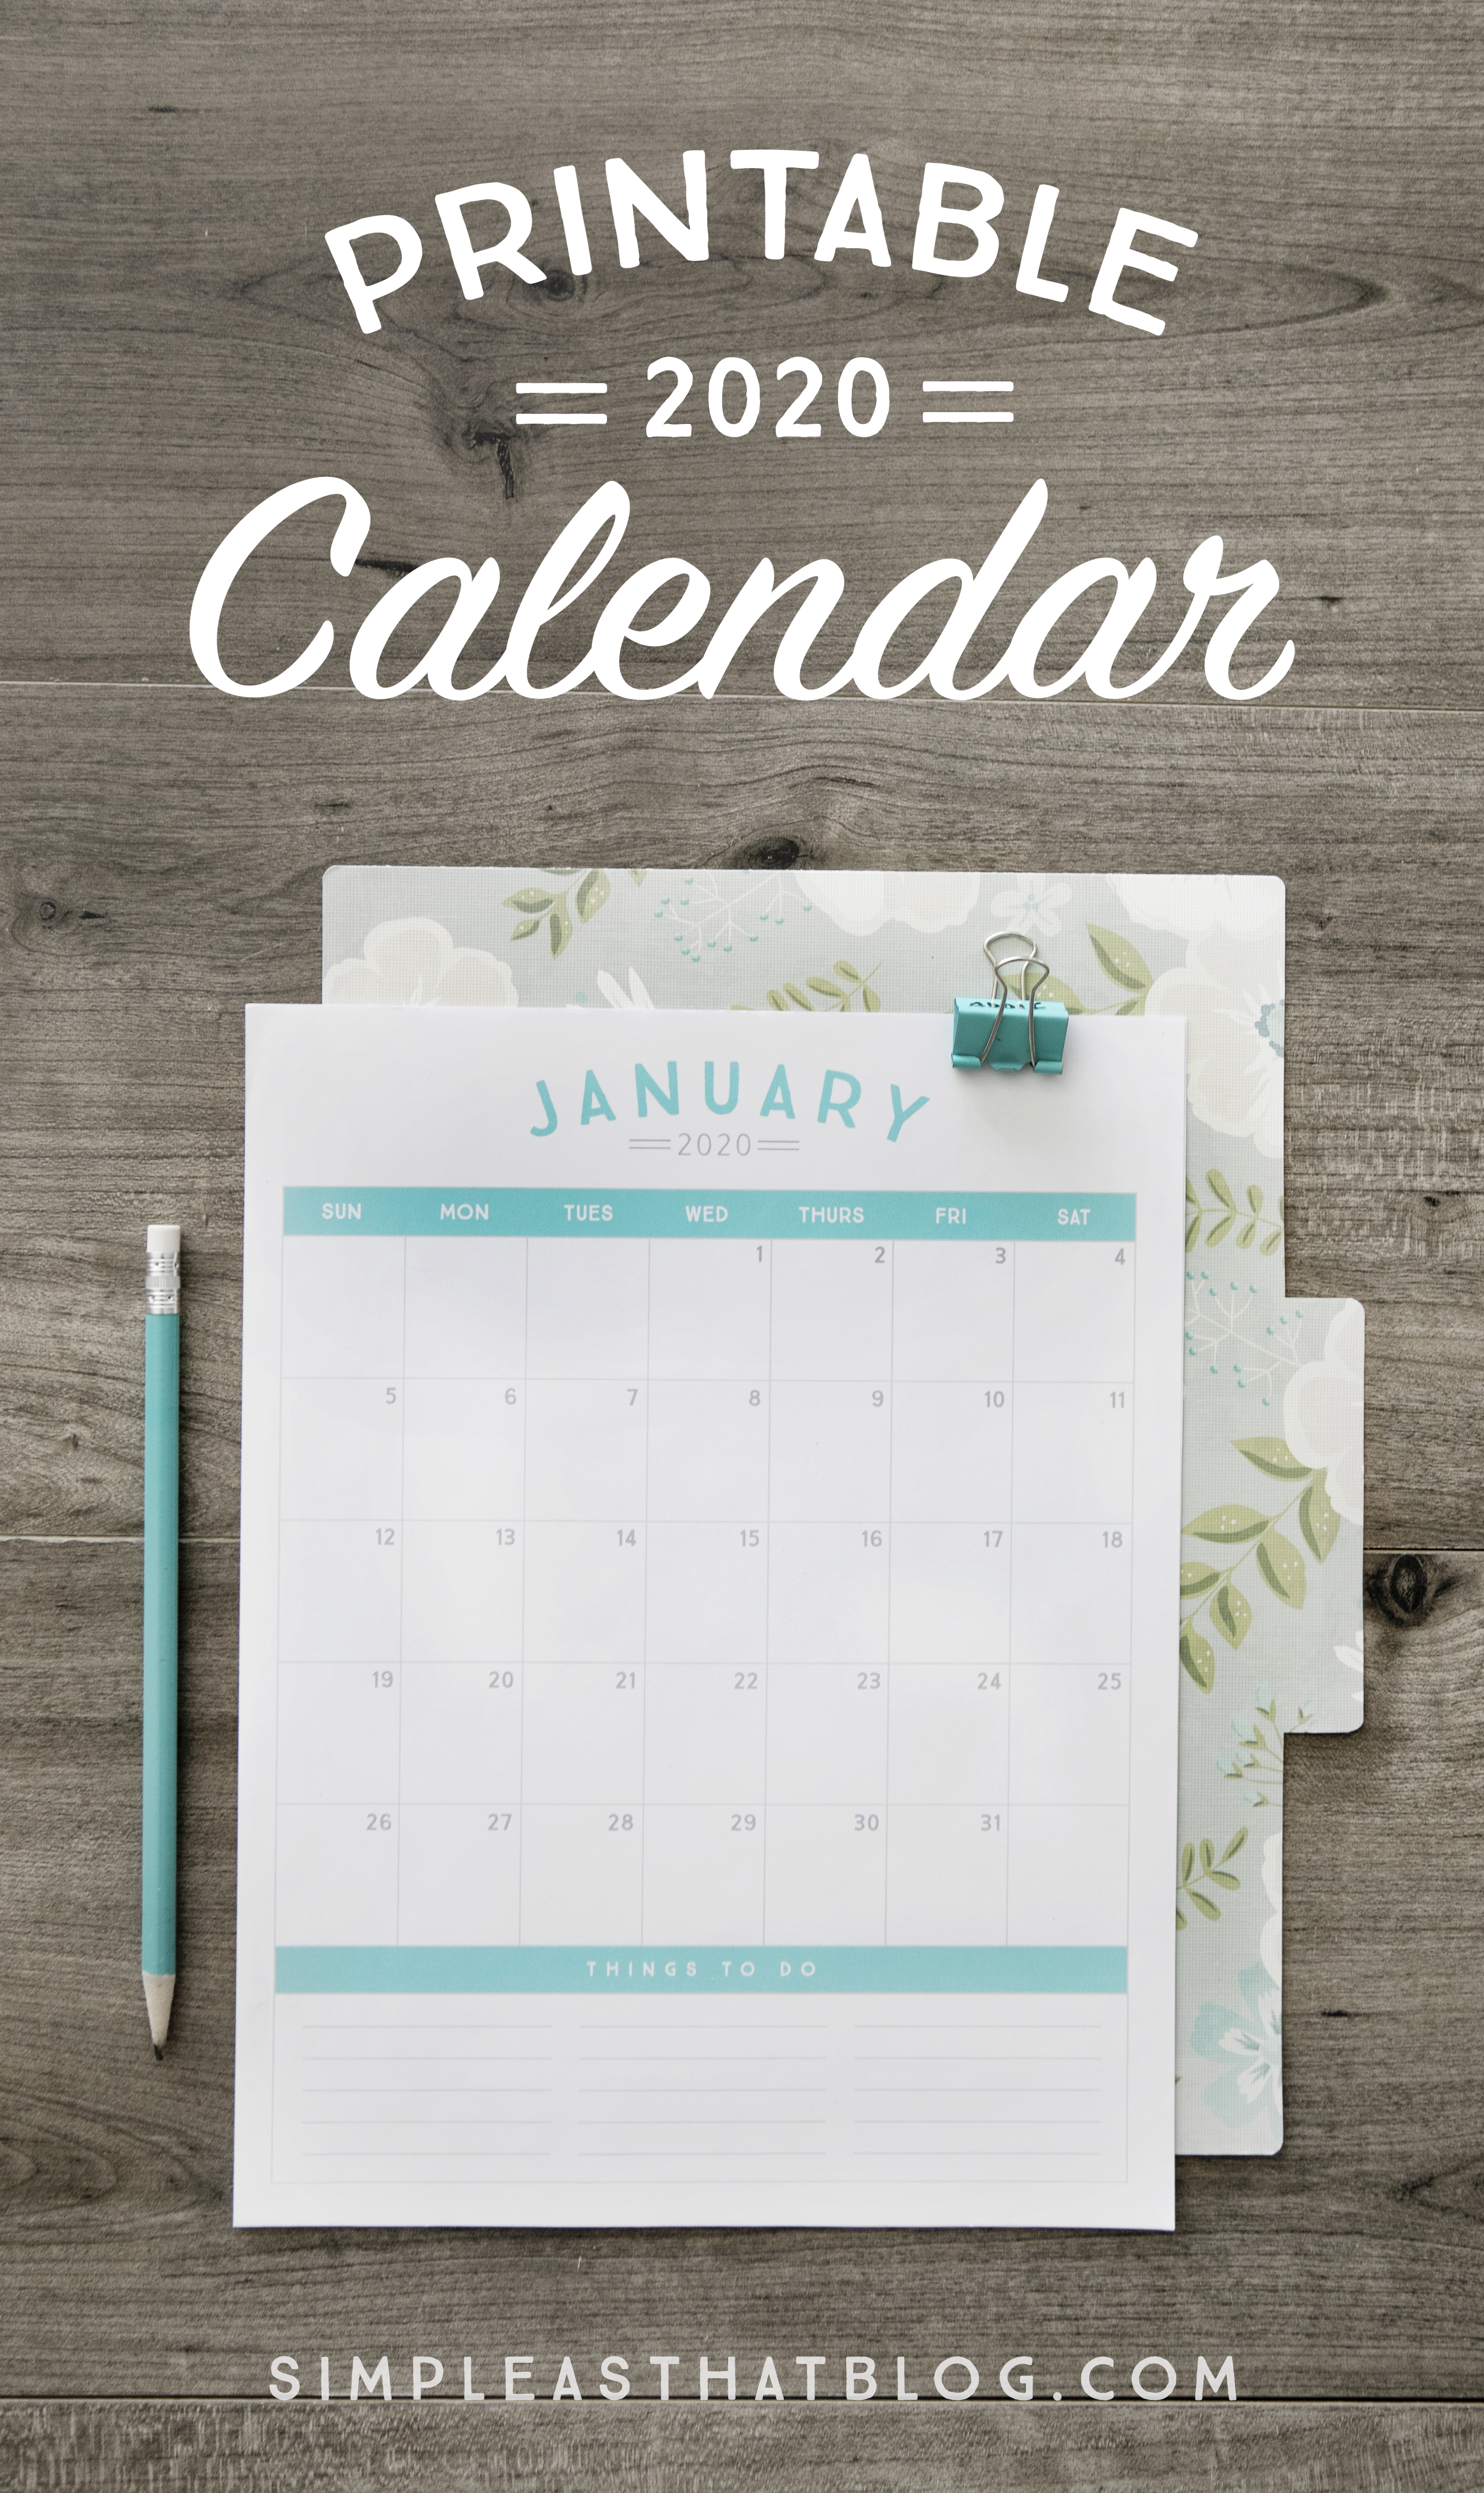 Get organized in the new year with a brand new 2020 printable calendar!